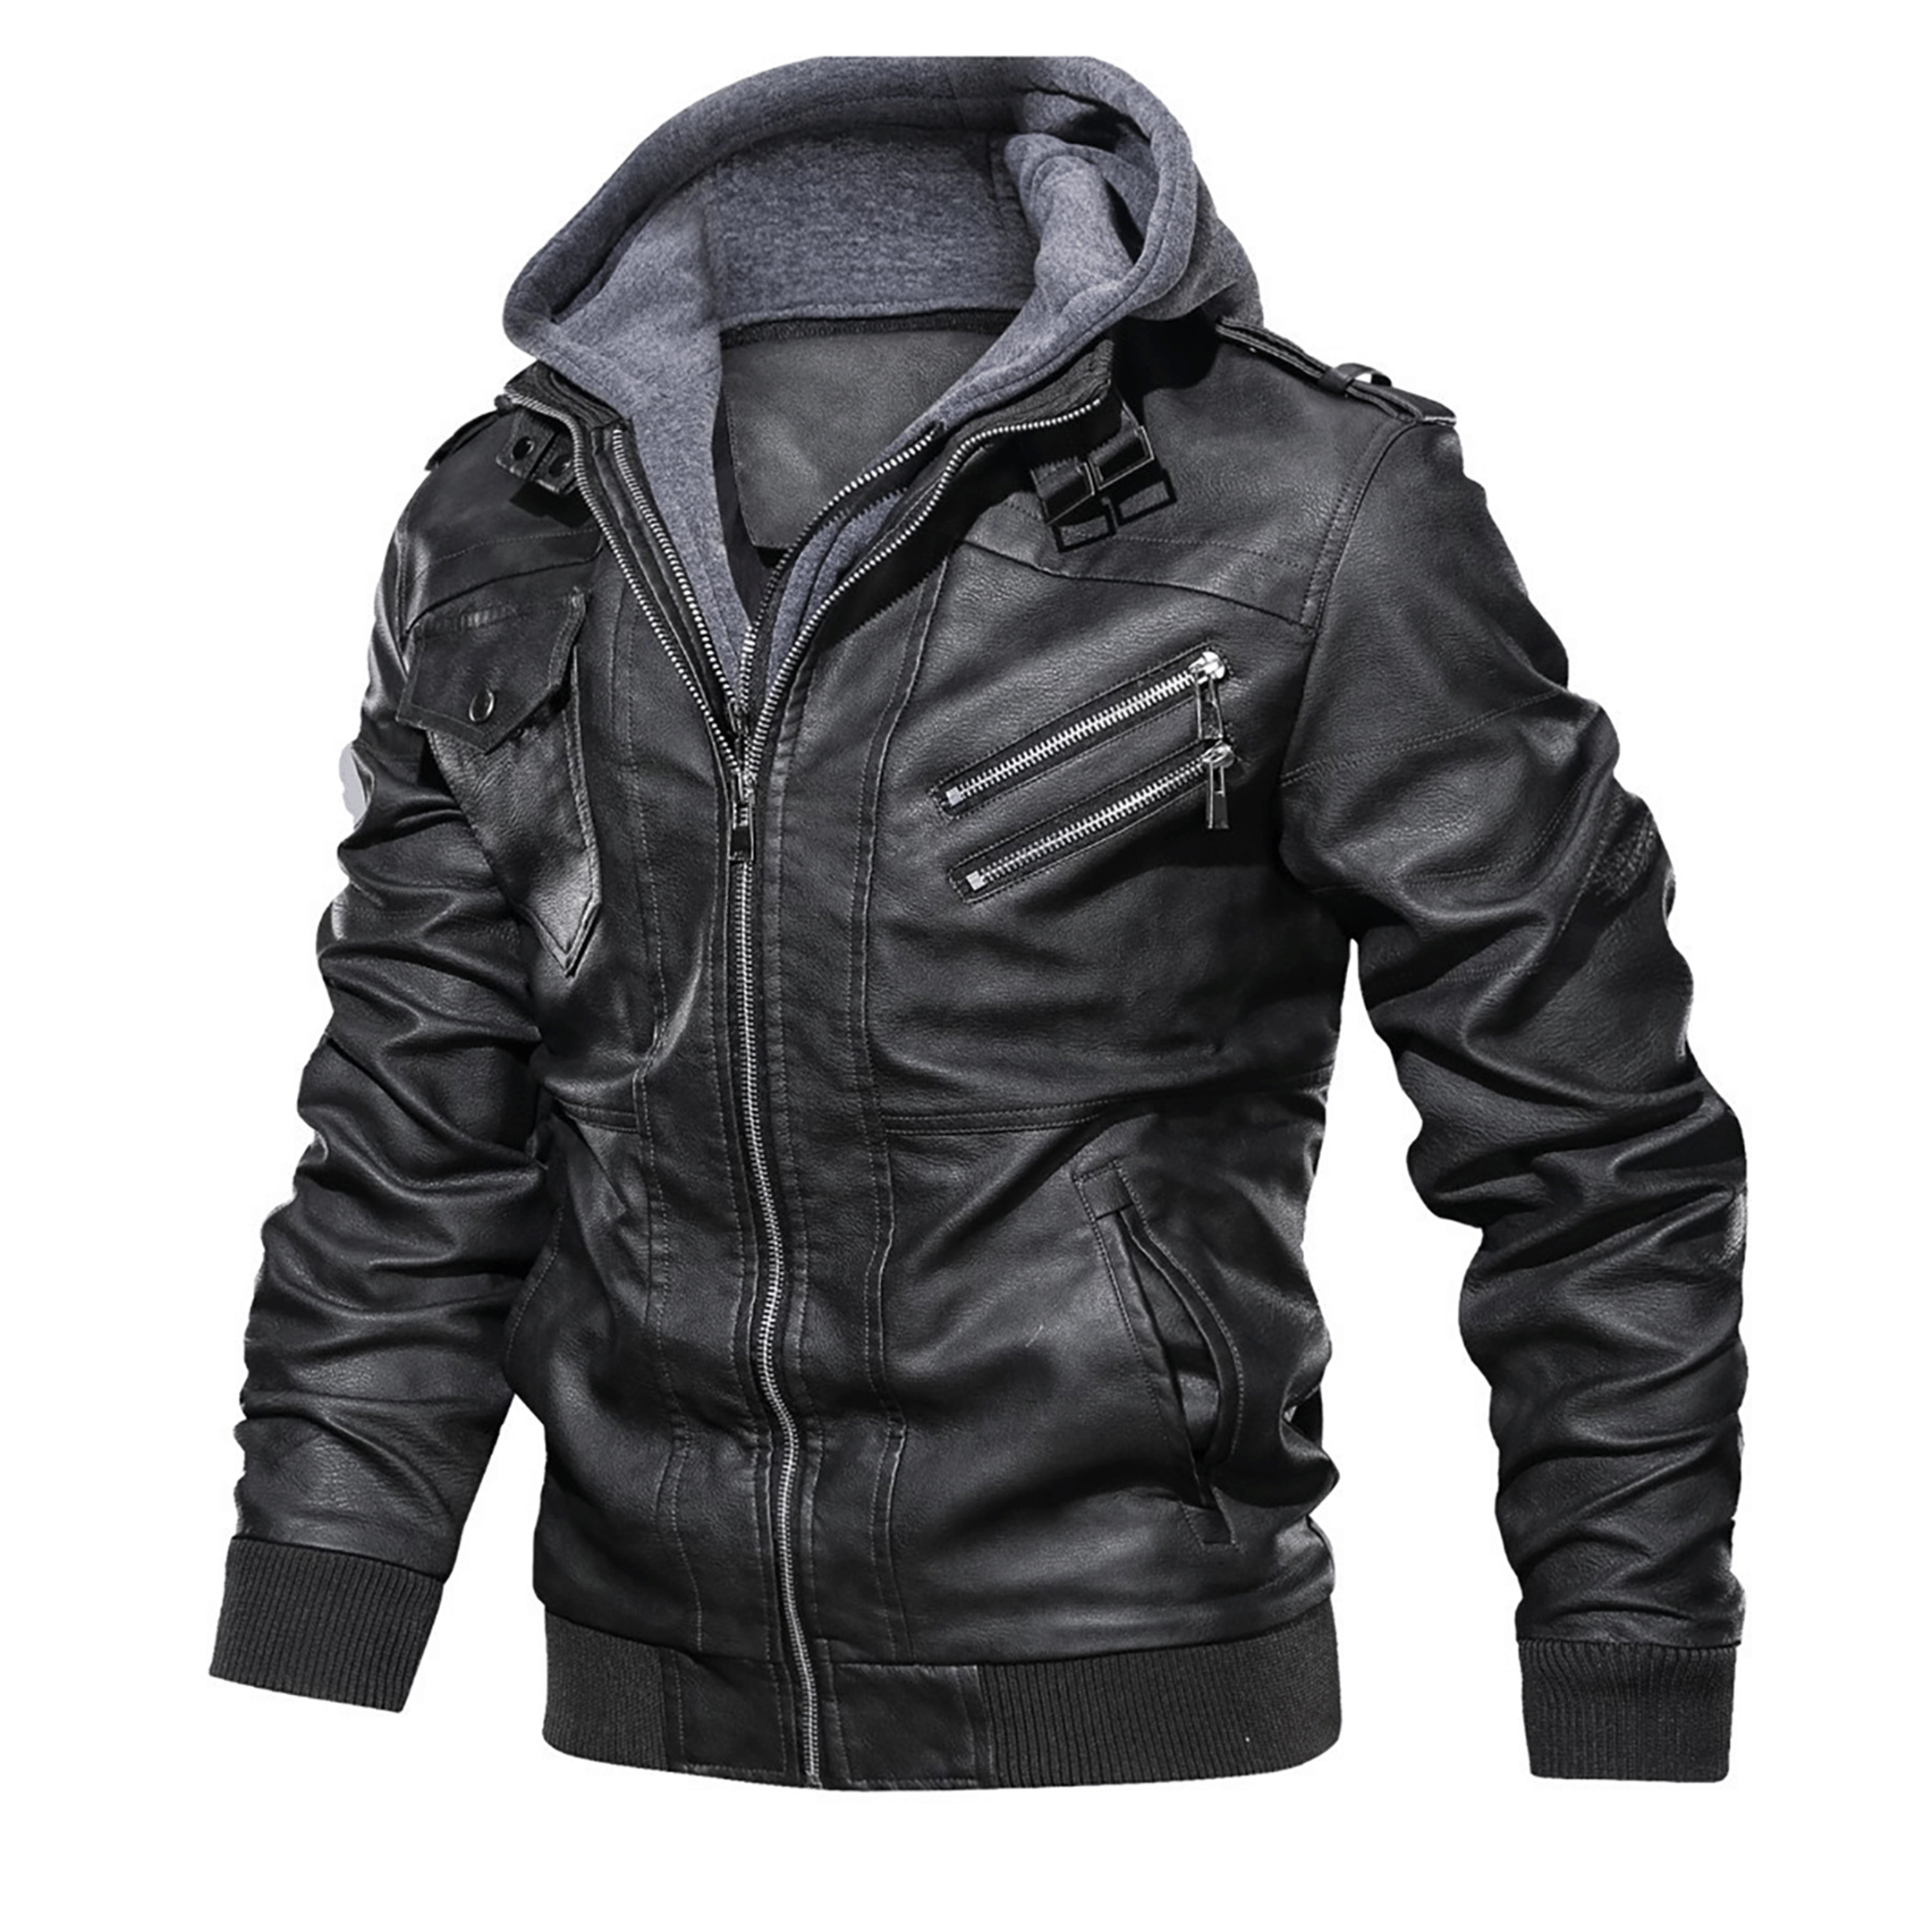 Top leather jackets and latest products 489